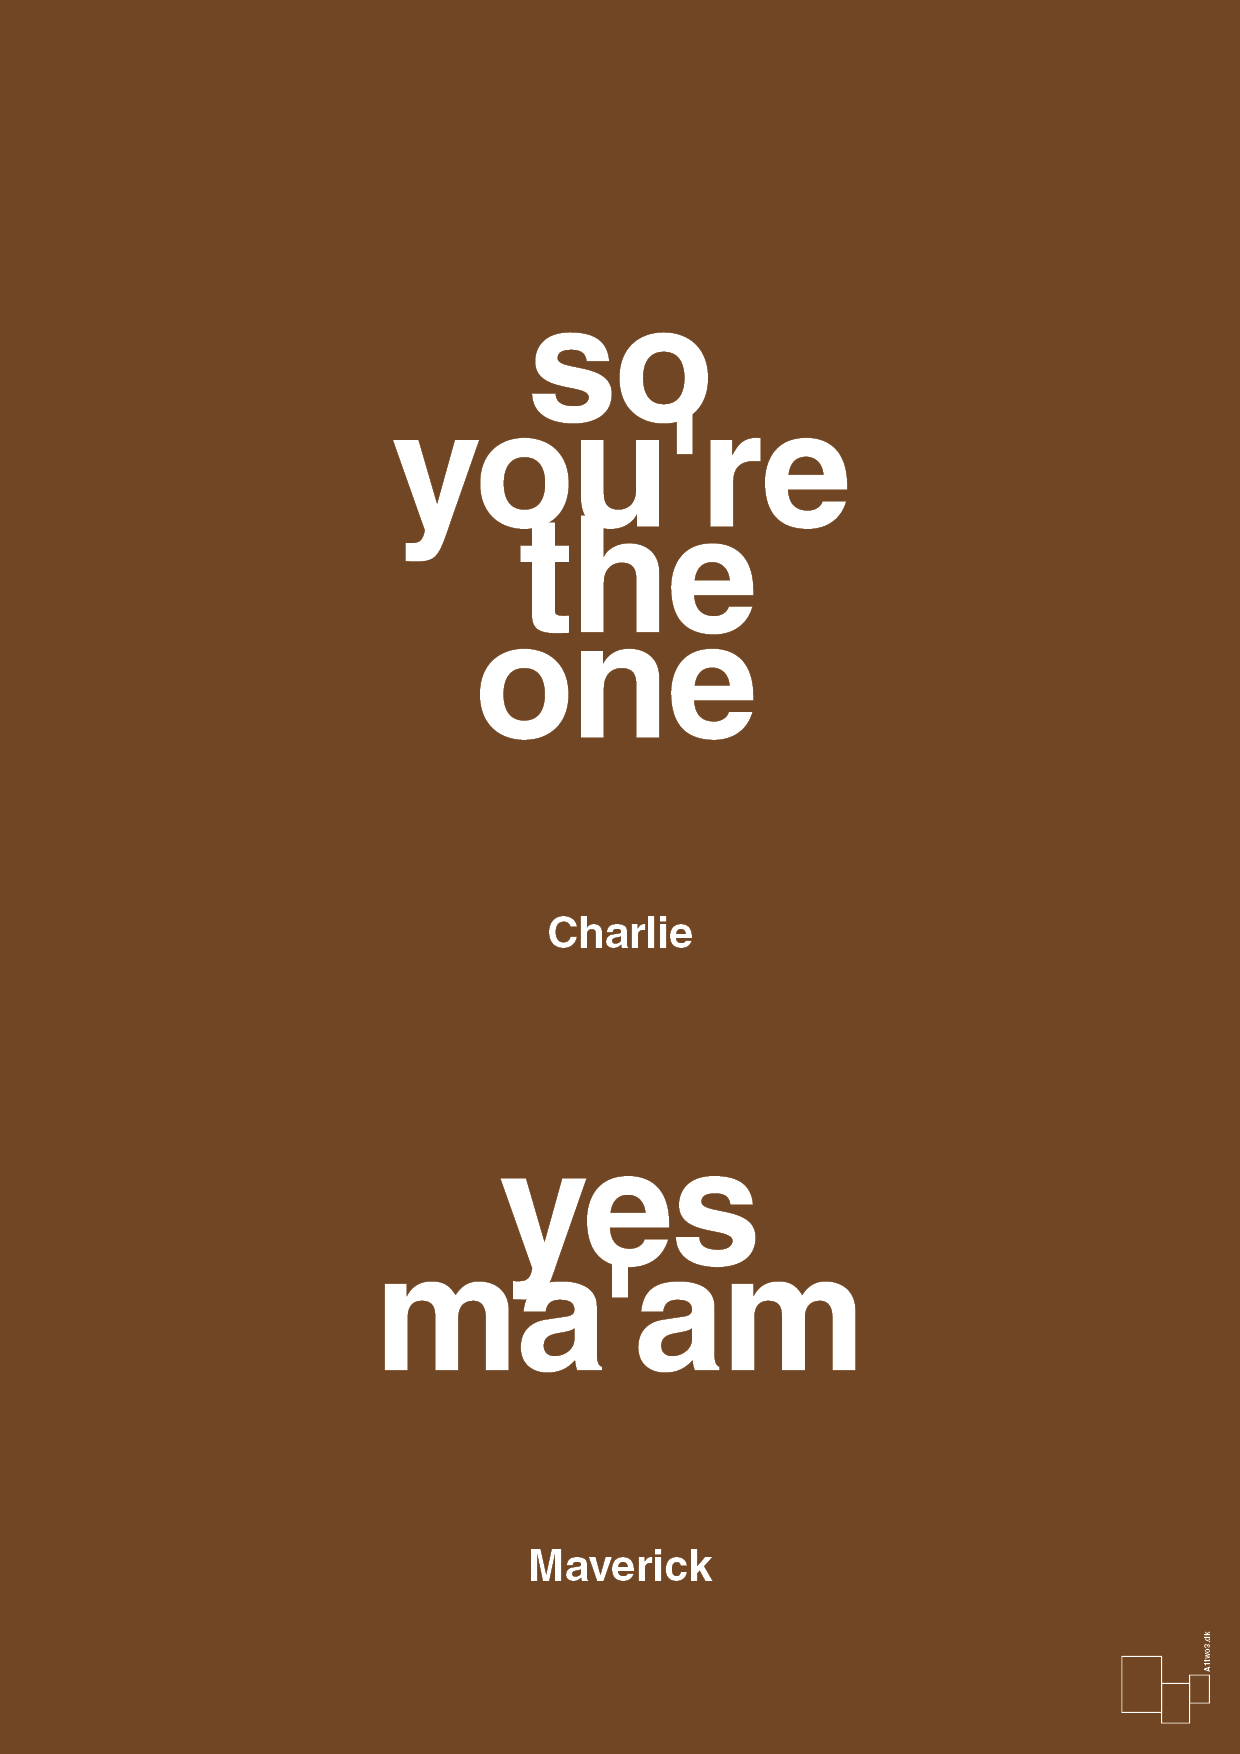 so you're the one - yes ma'am - Plakat med Citater i Dark Brown